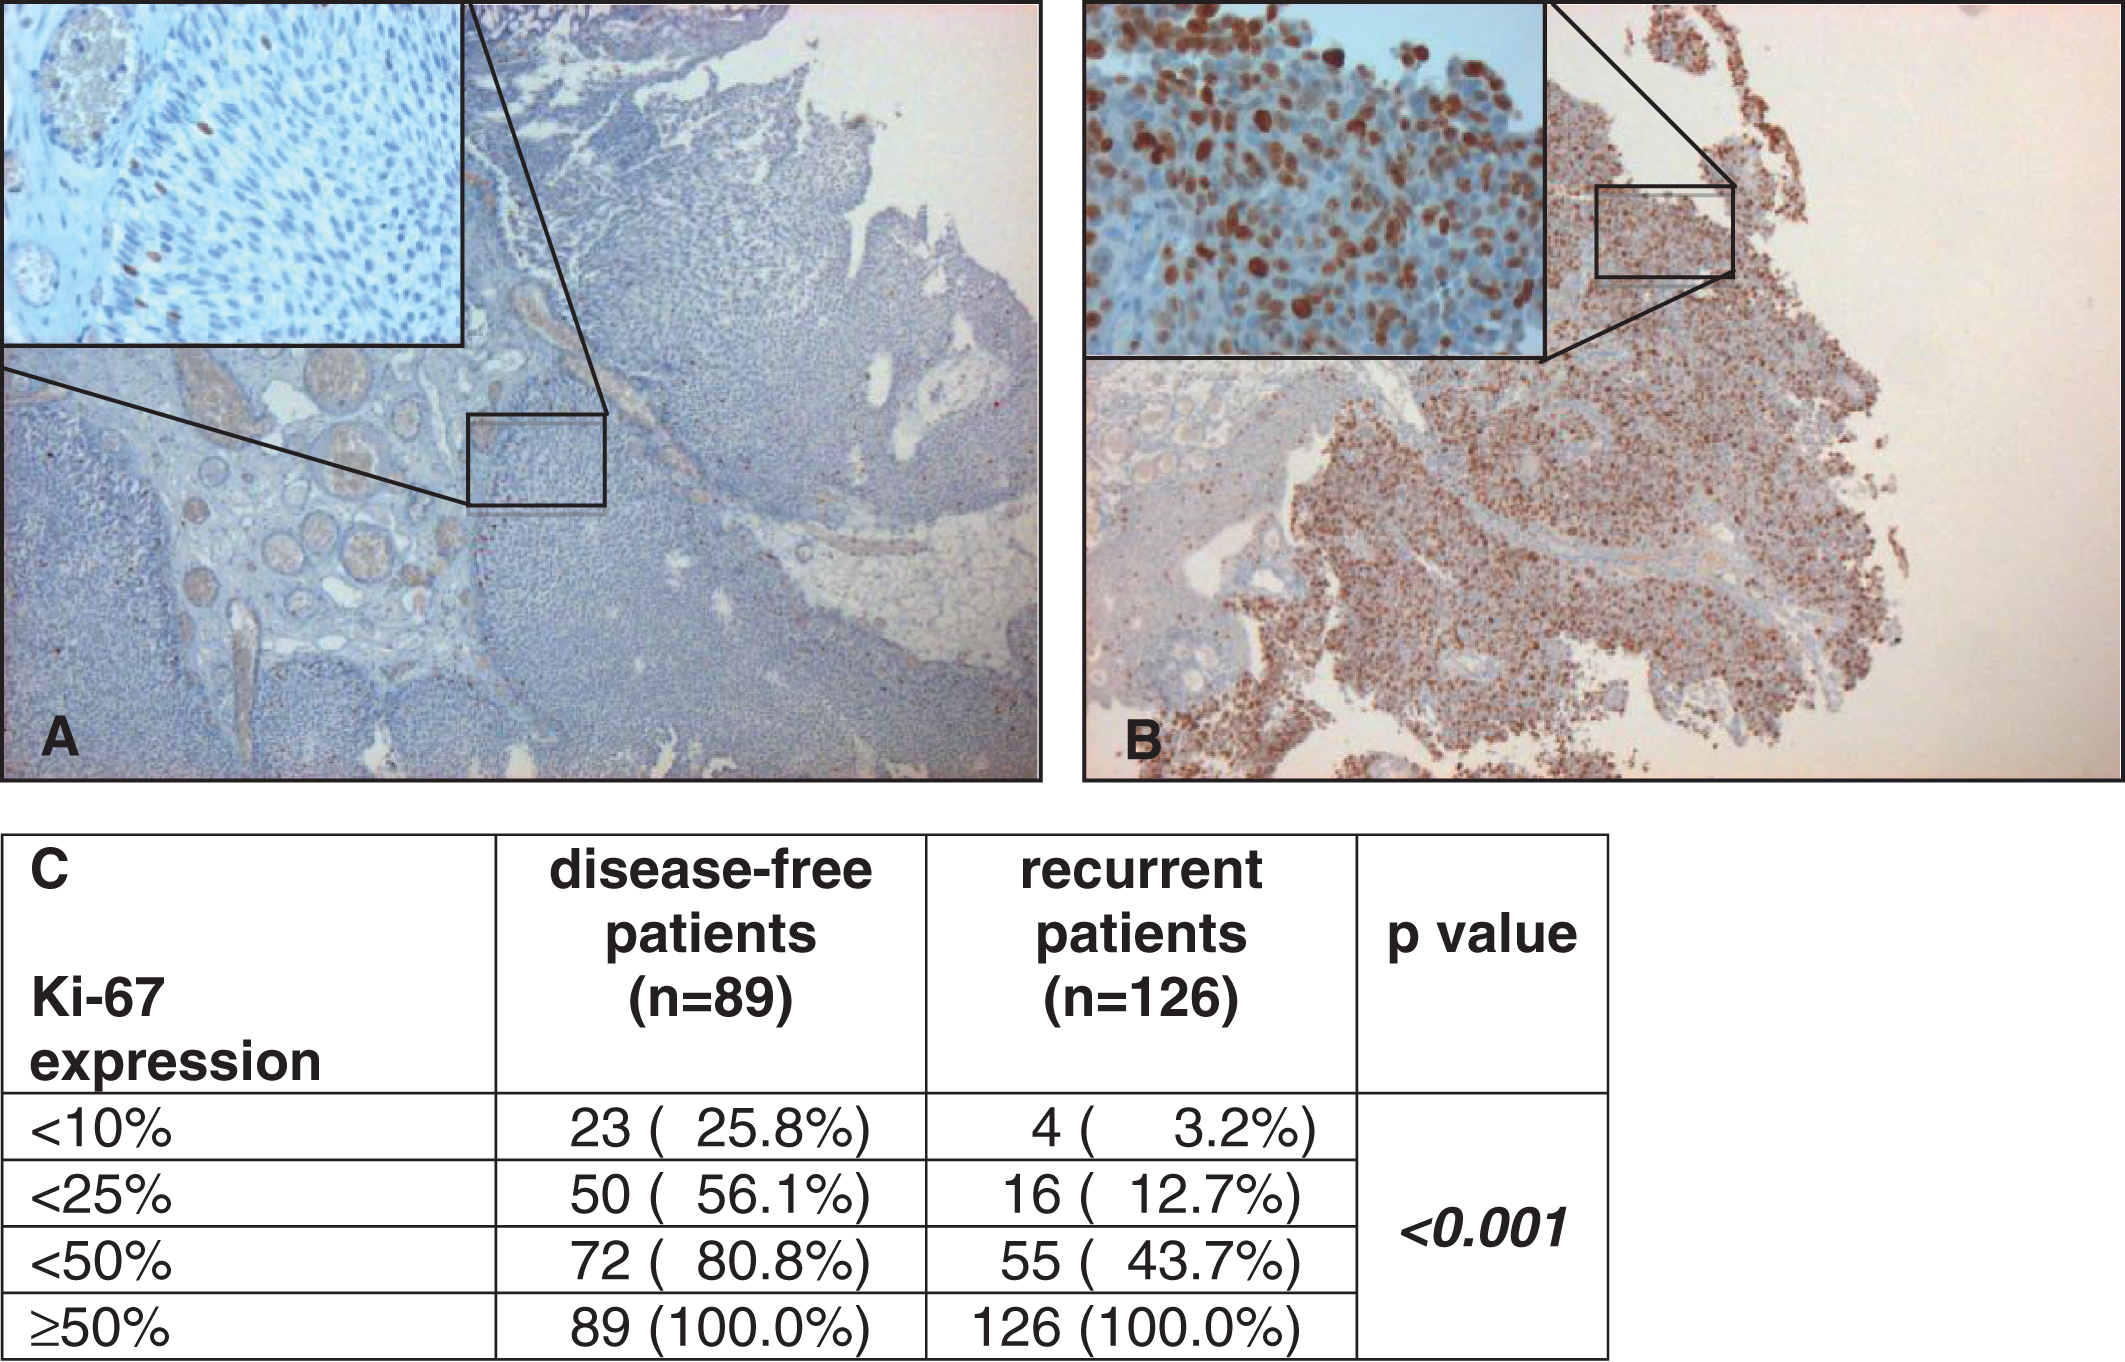 Examples of low (here <10%, A) and strong (here ≥50%, B) staining of Ki-67 under 5 fold and 40 fold (left above) magnification. Correlation of Ki-67 expression with disease-free and recurrent patients by cumulative numbers and rates (C).